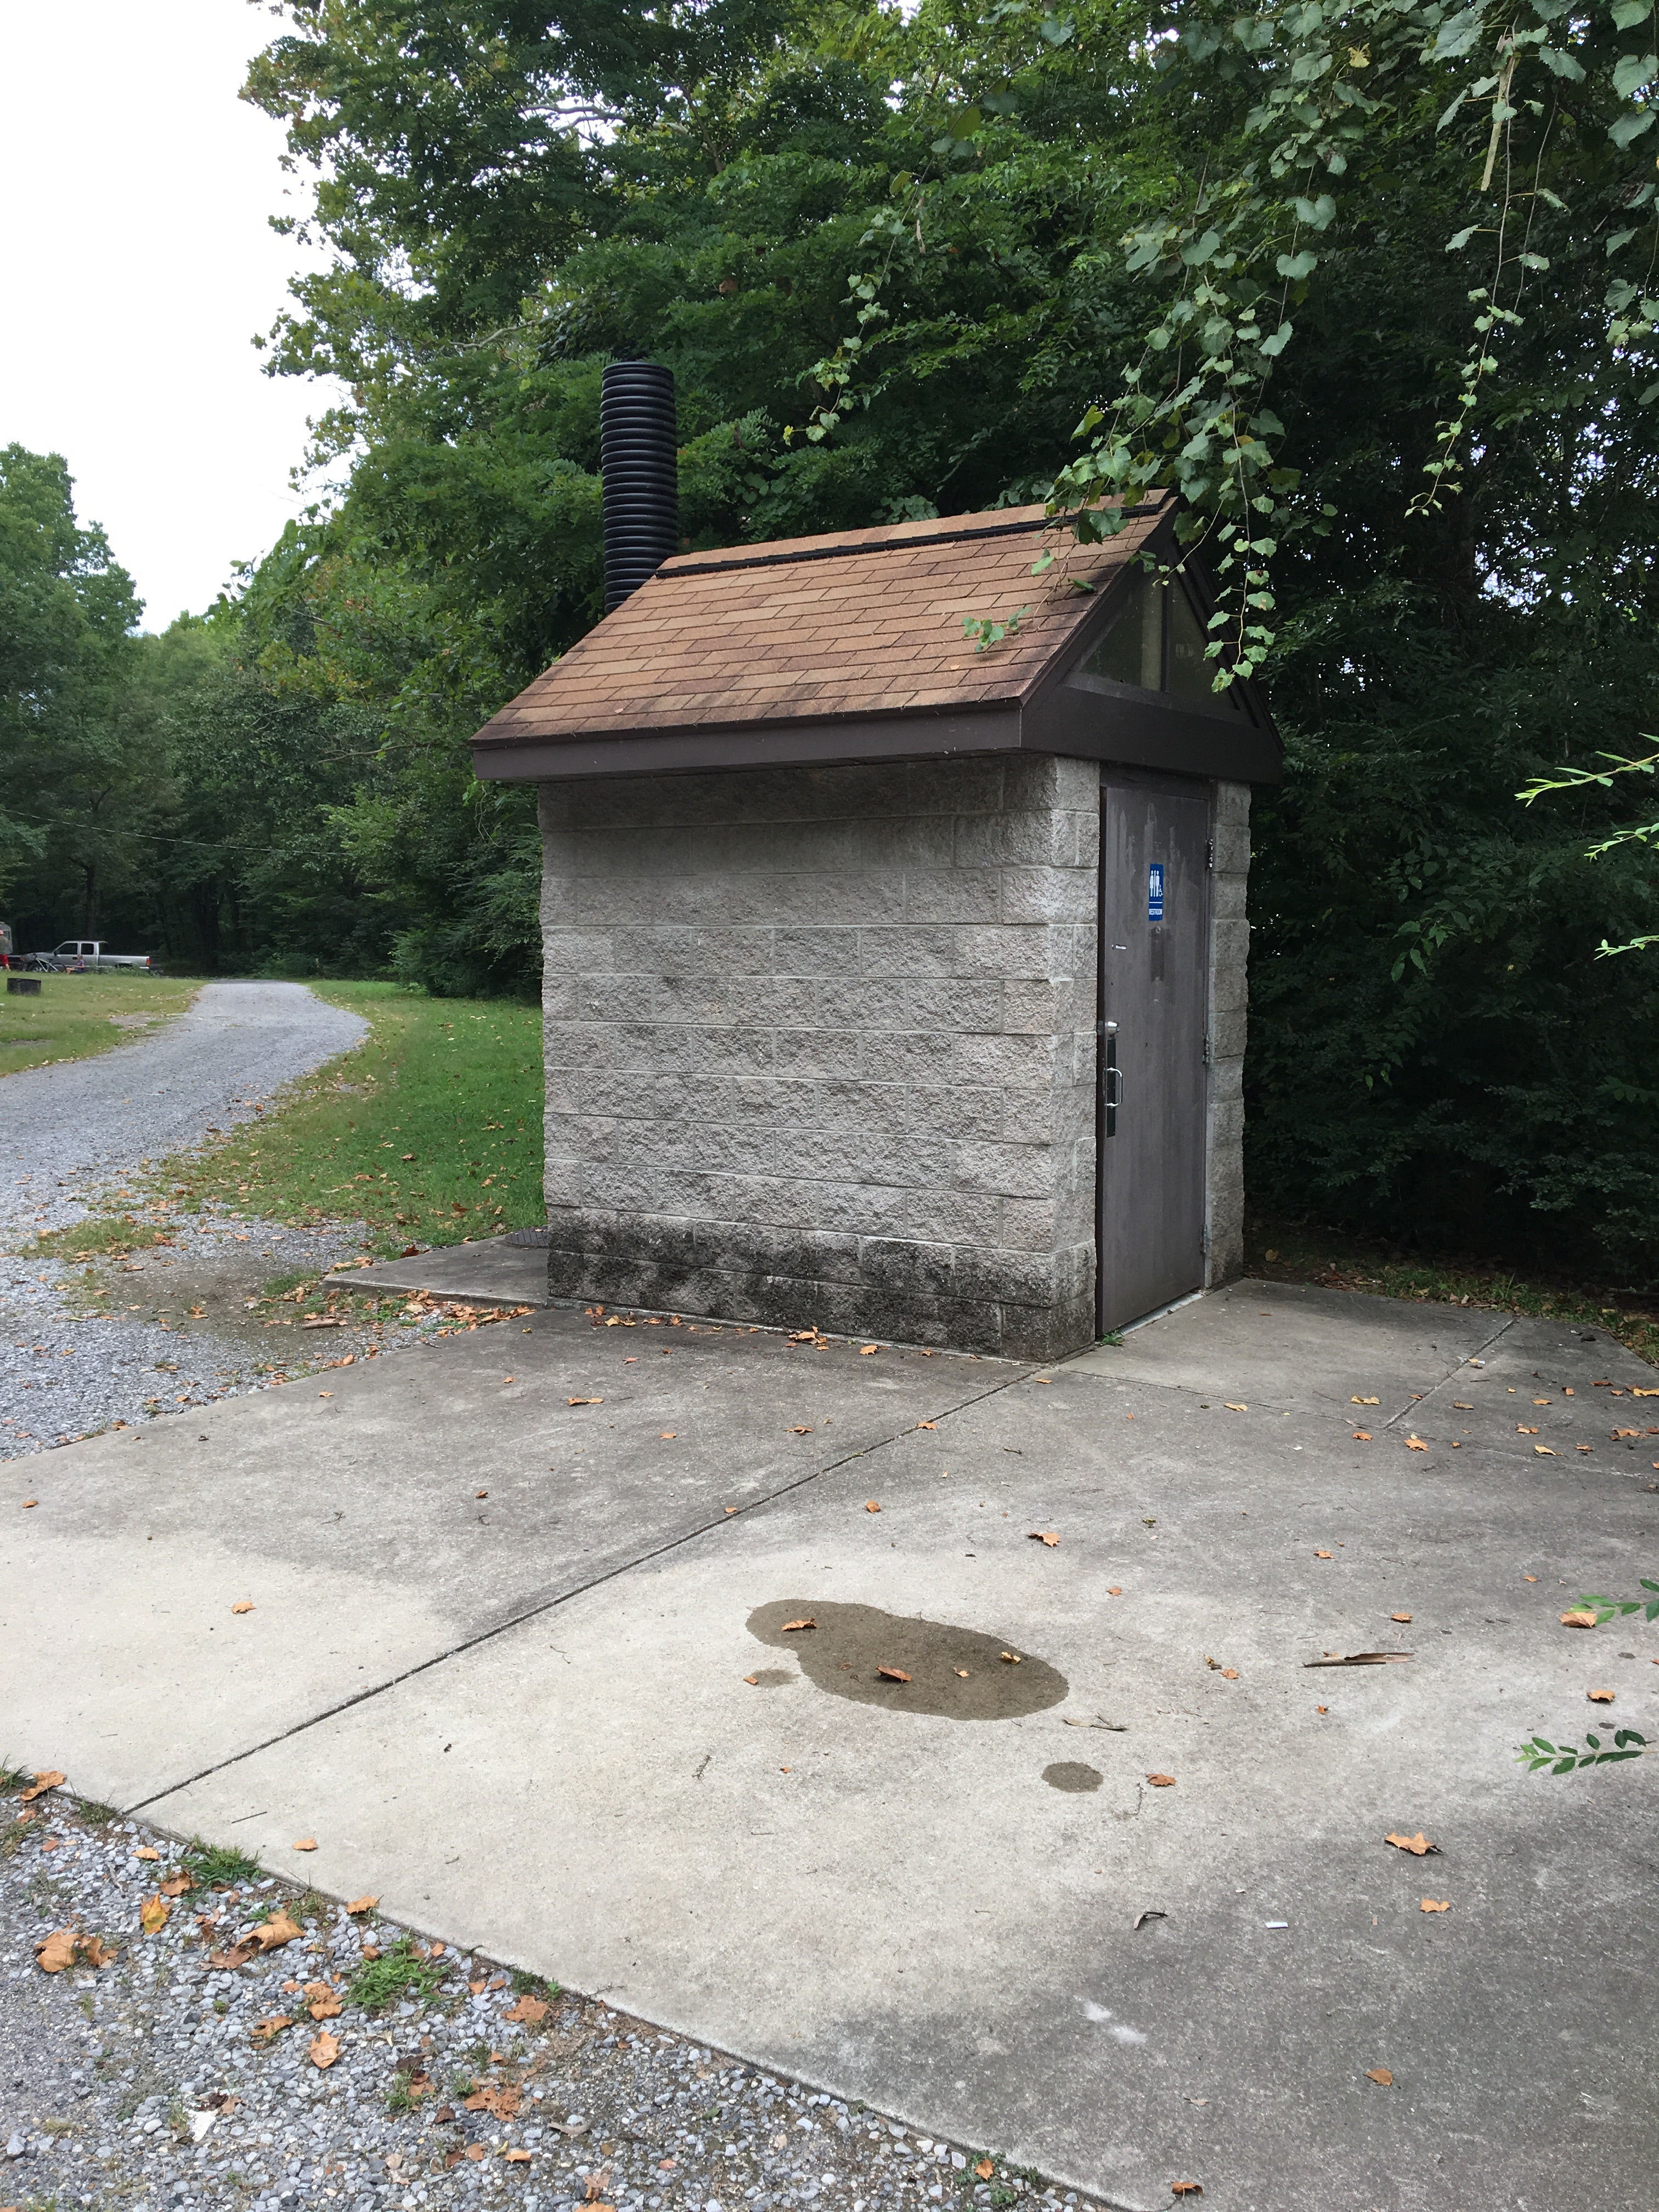 The pit toilet near the pavilion and campground